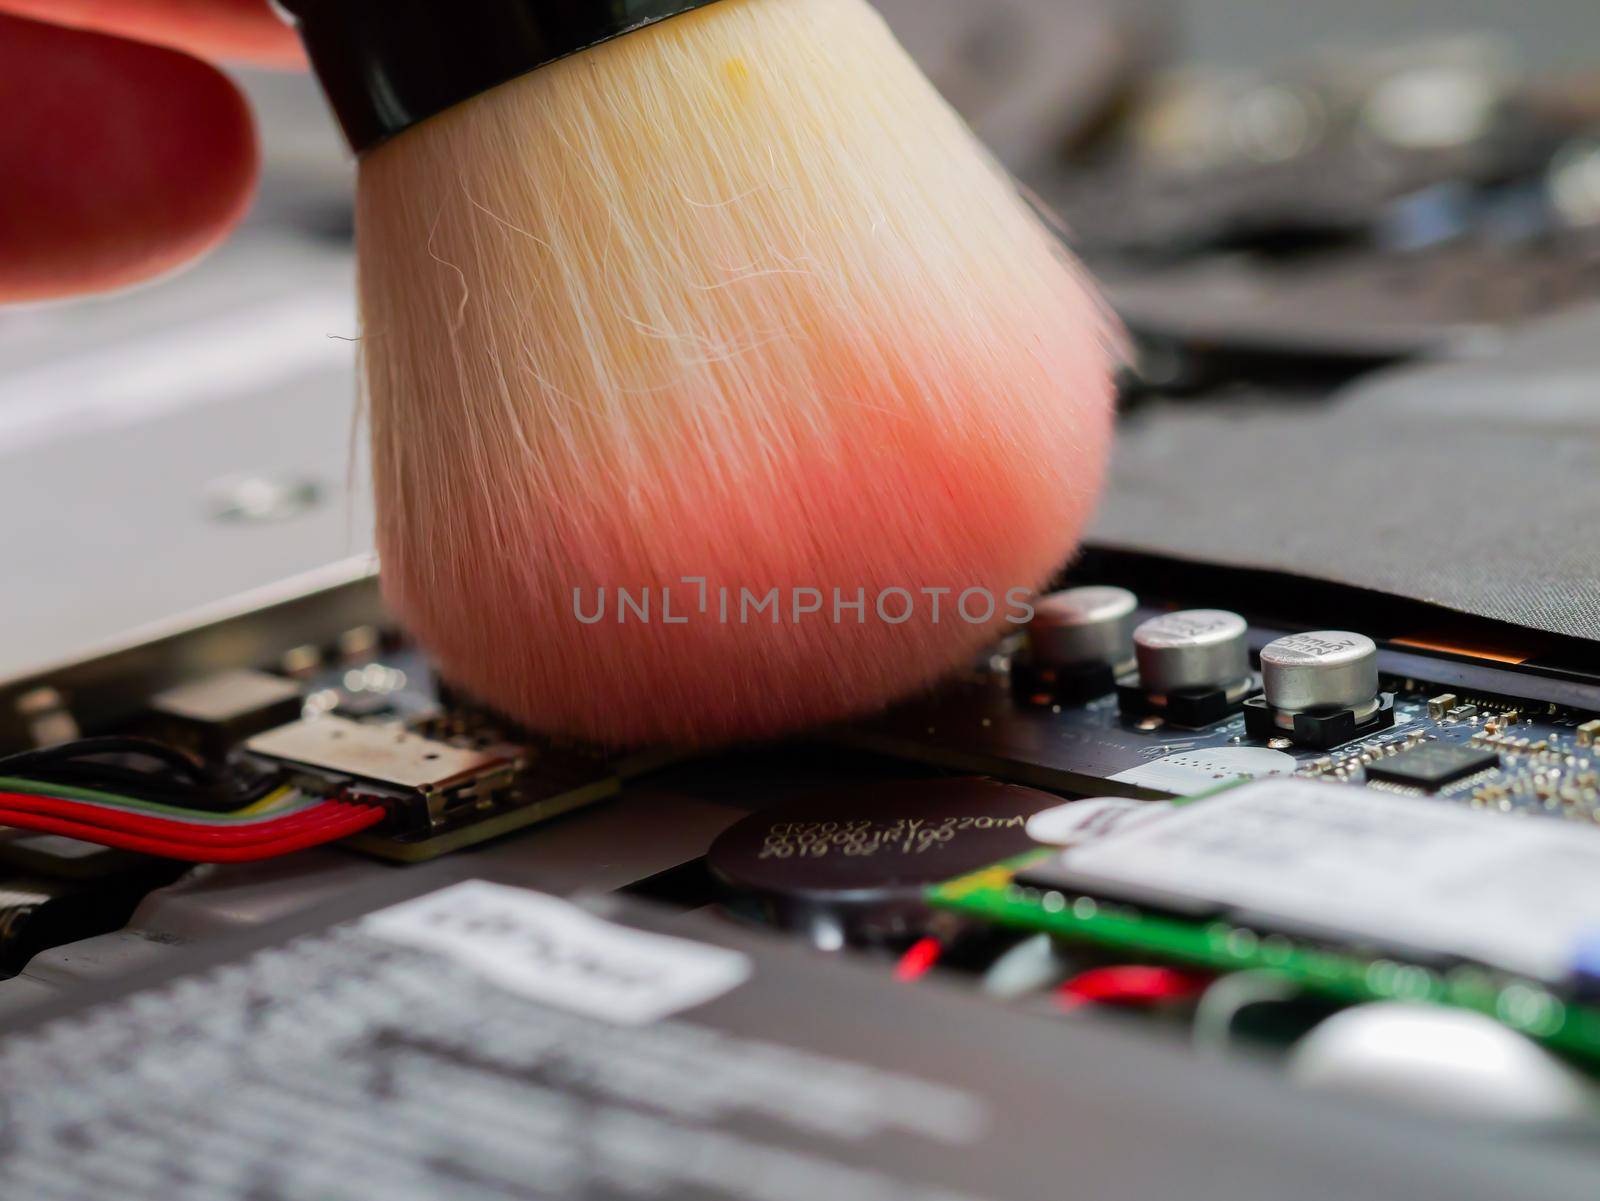 Cleaning a laptop with brush at a professional service. by RecCameraStock